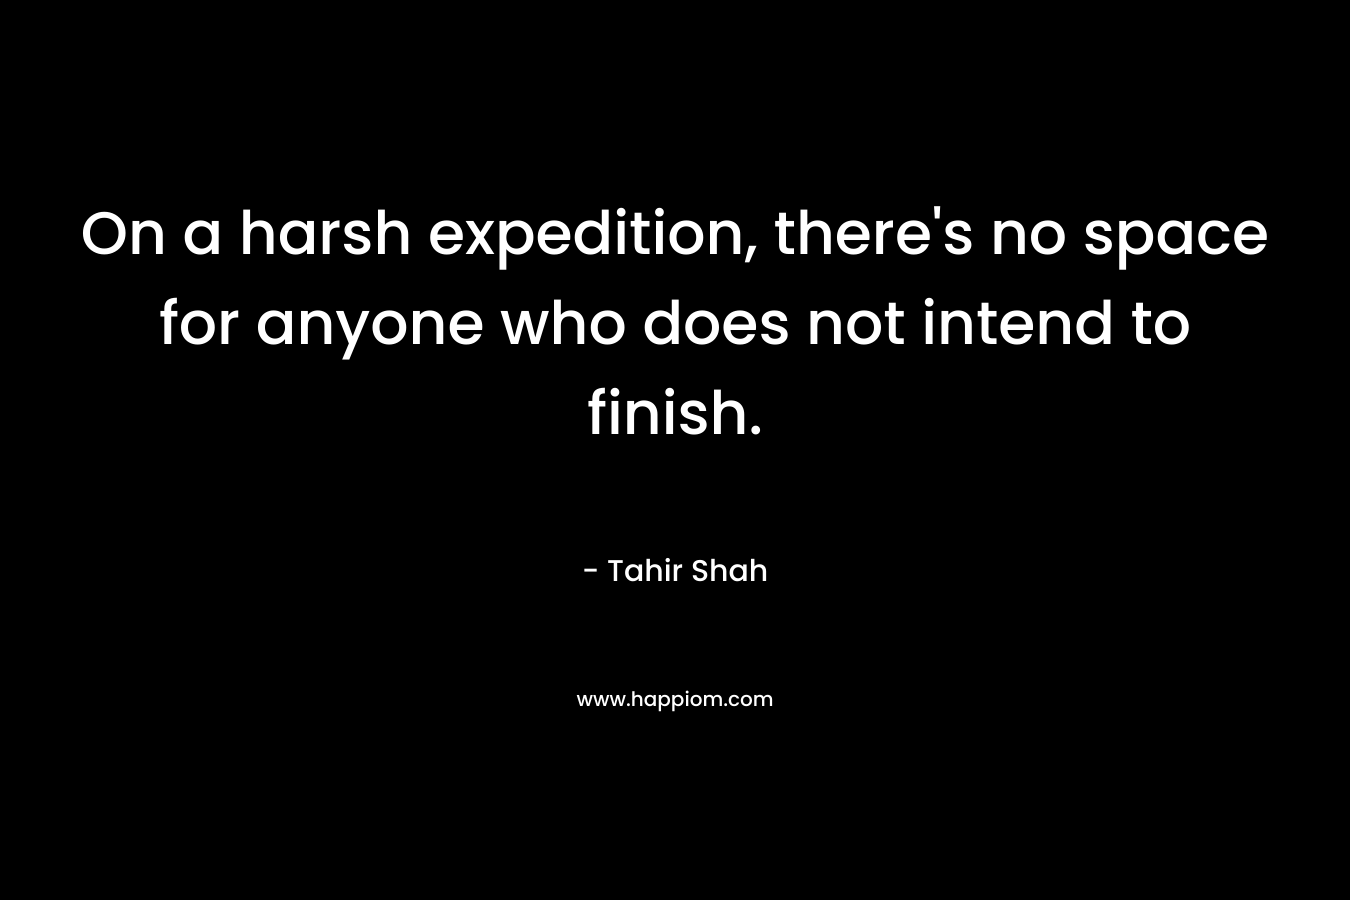 On a harsh expedition, there’s no space for anyone who does not intend to finish. – Tahir Shah